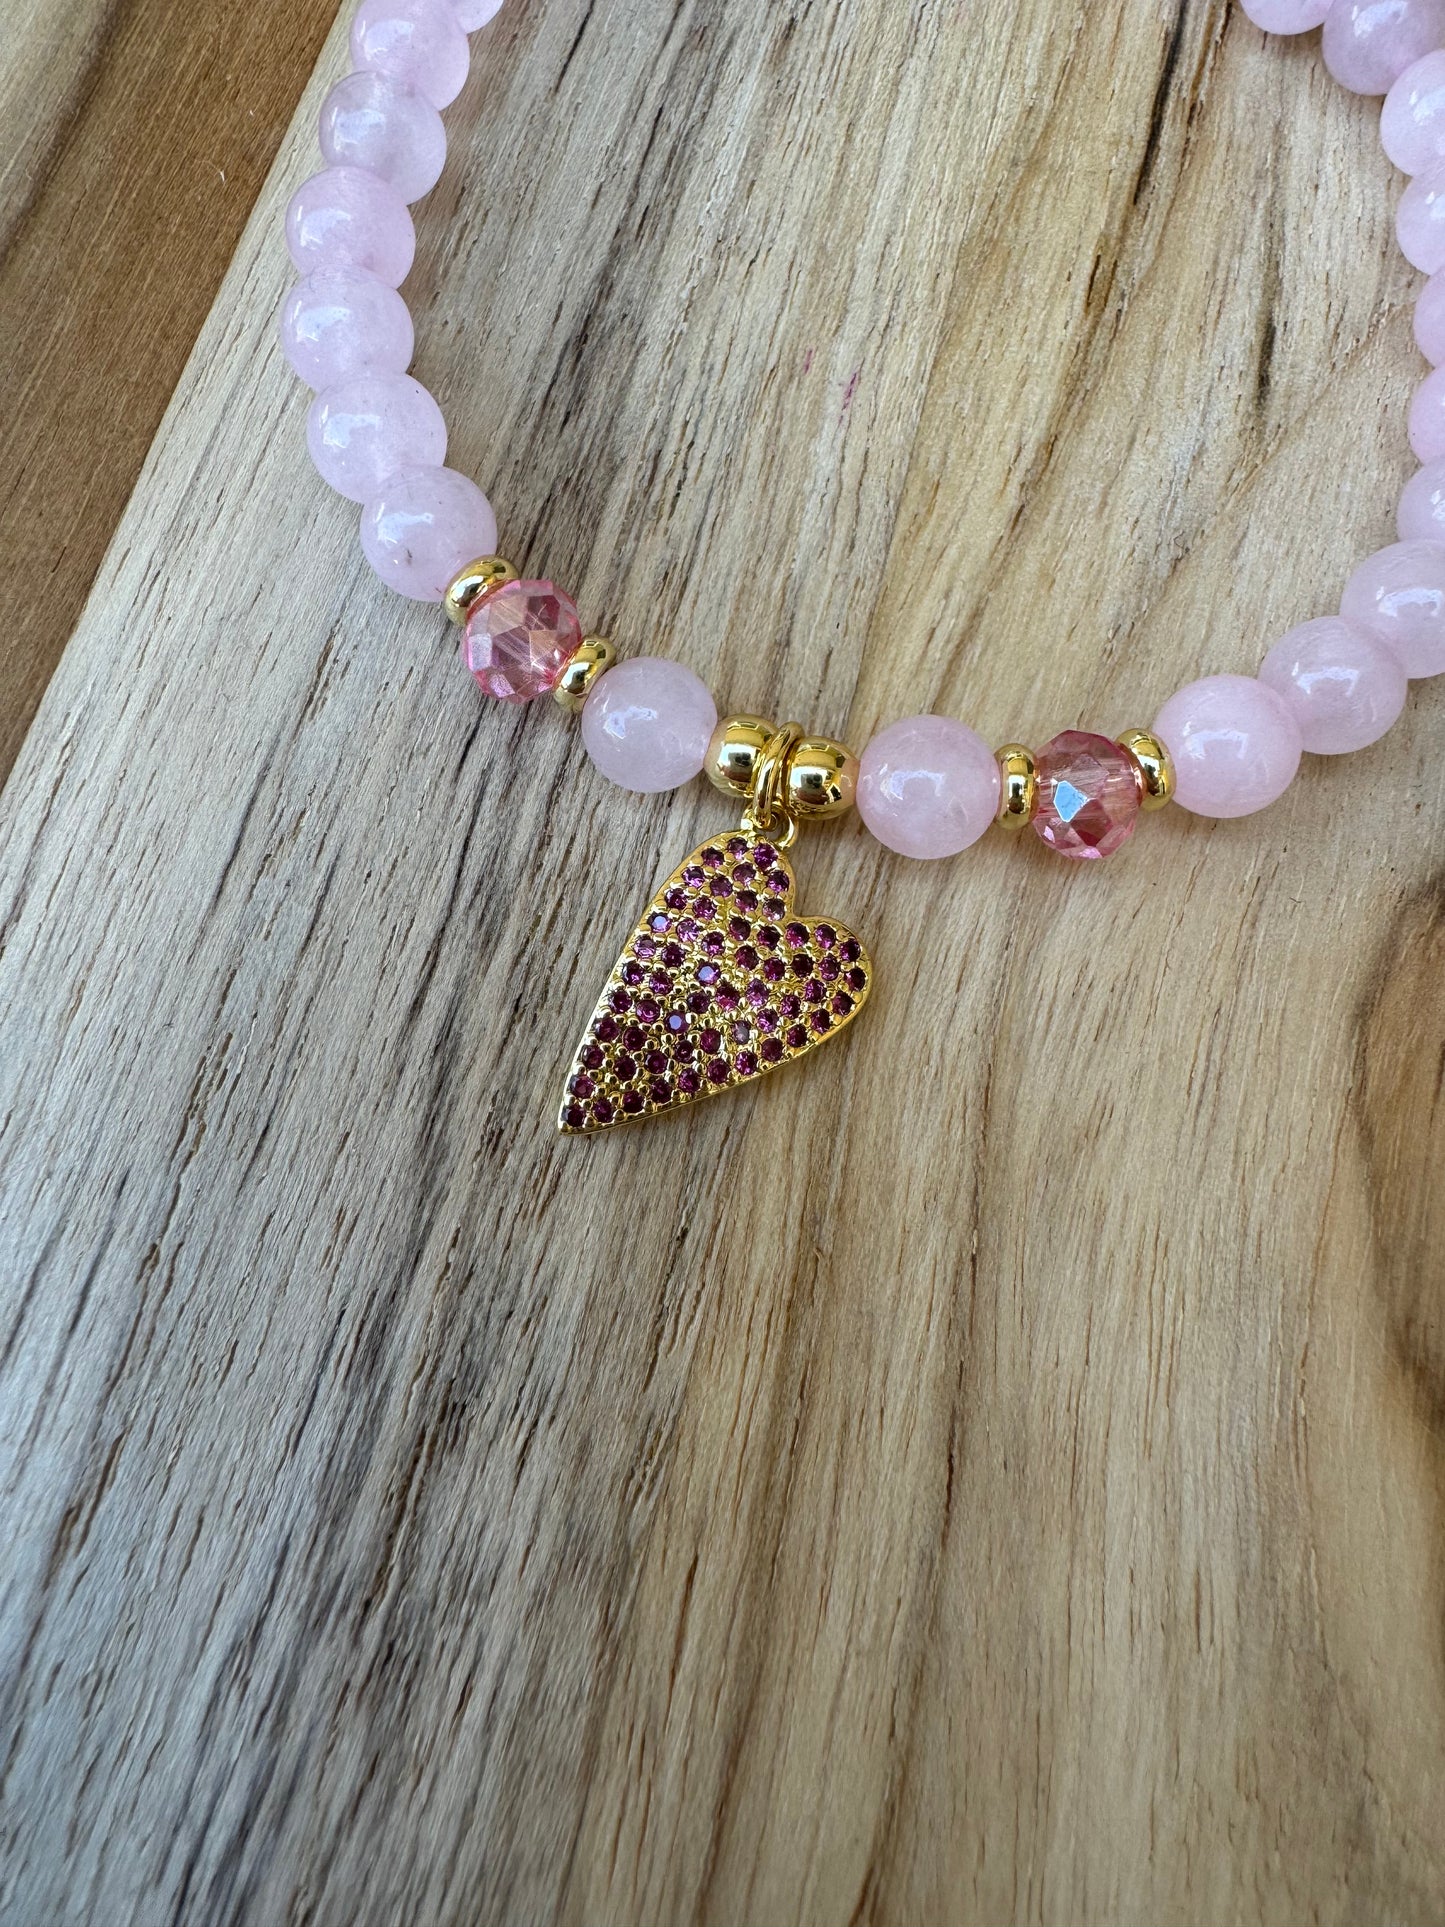 Rose Quartz Beaded Stretch Bracelet with Gold Heart Charm Pink Crystals